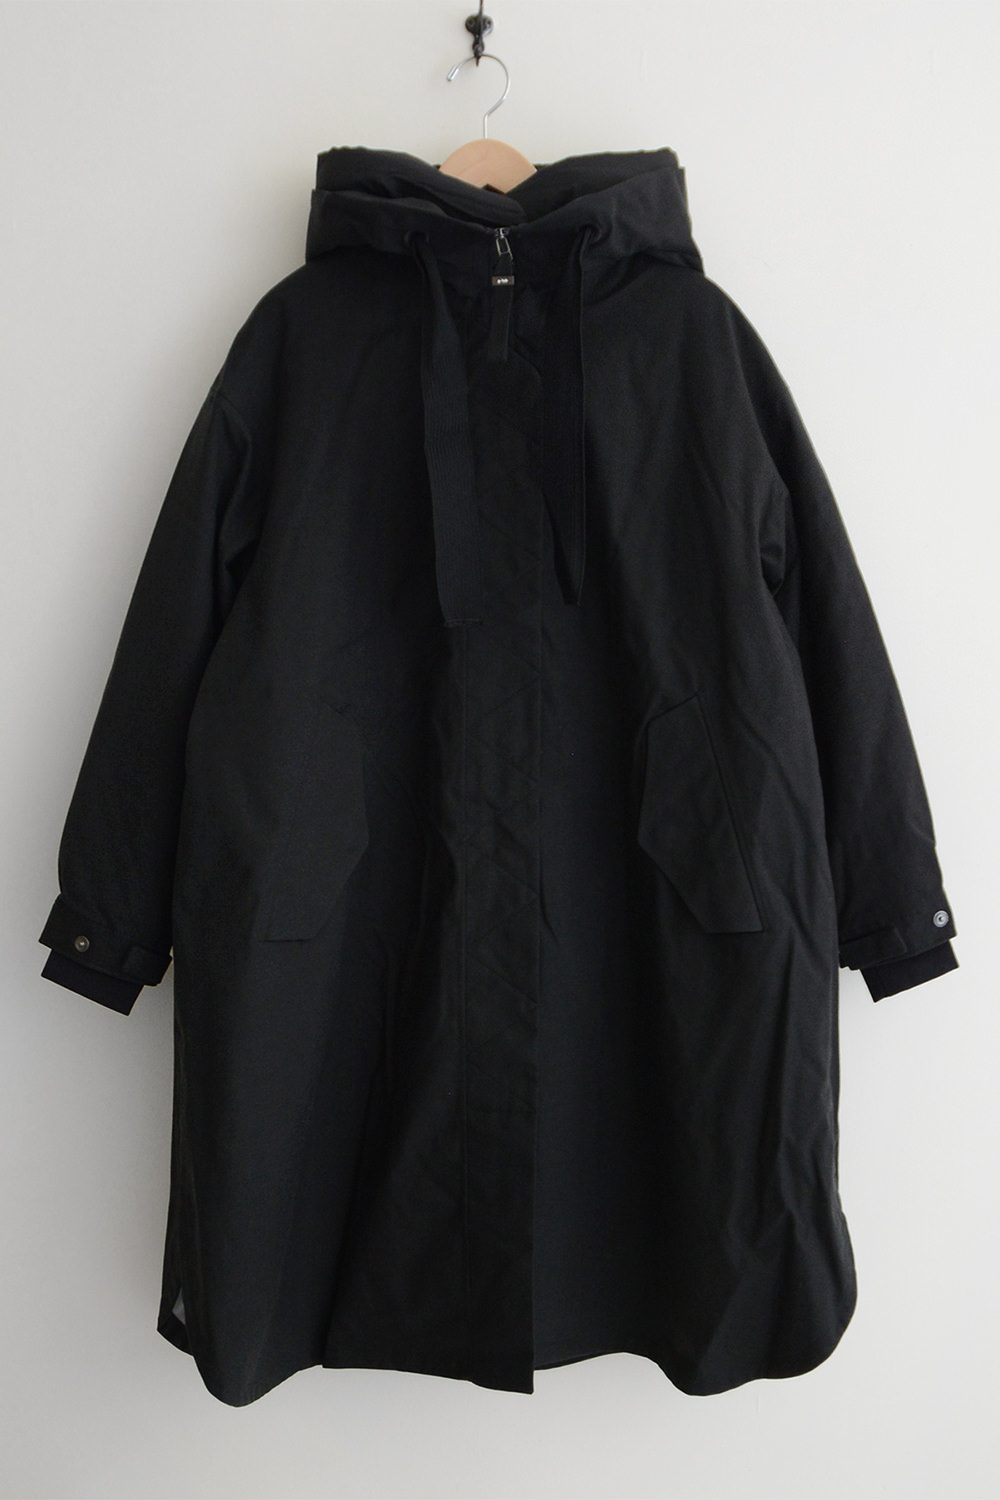 G-lab Akira Soft Canvas Coat in Black Top Picture